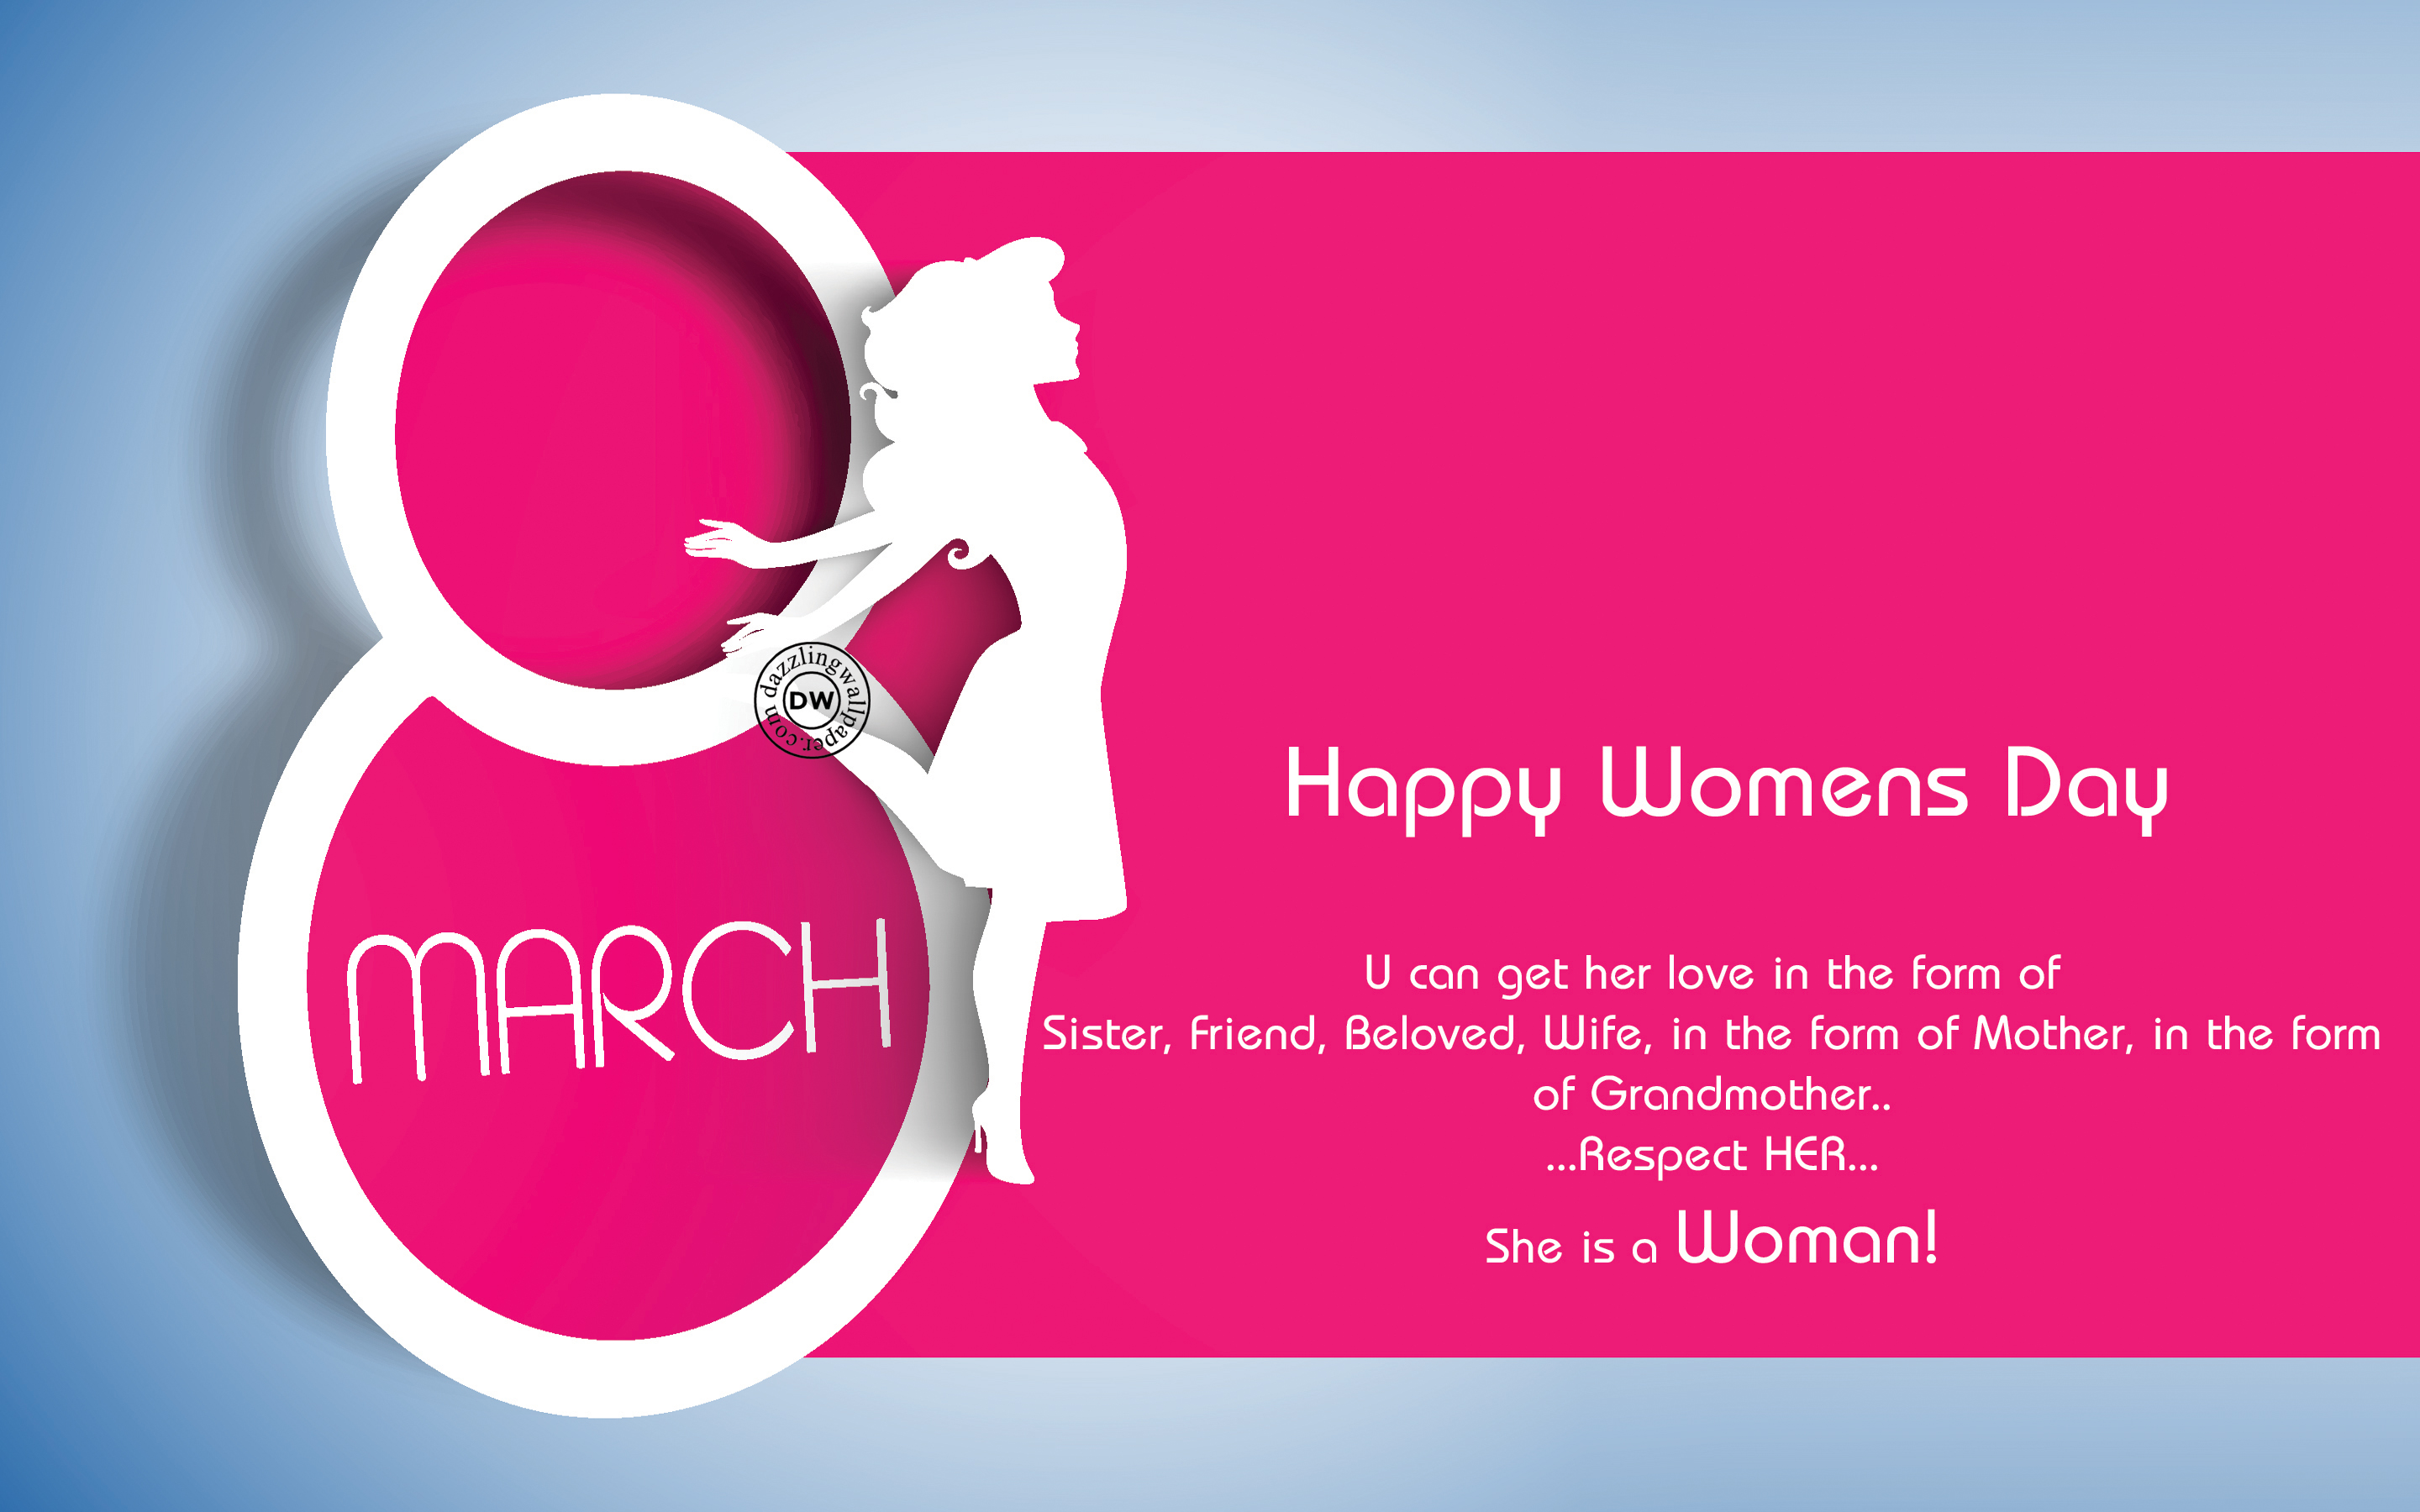 Amazing International Woman's Day Pictures & Backgrounds